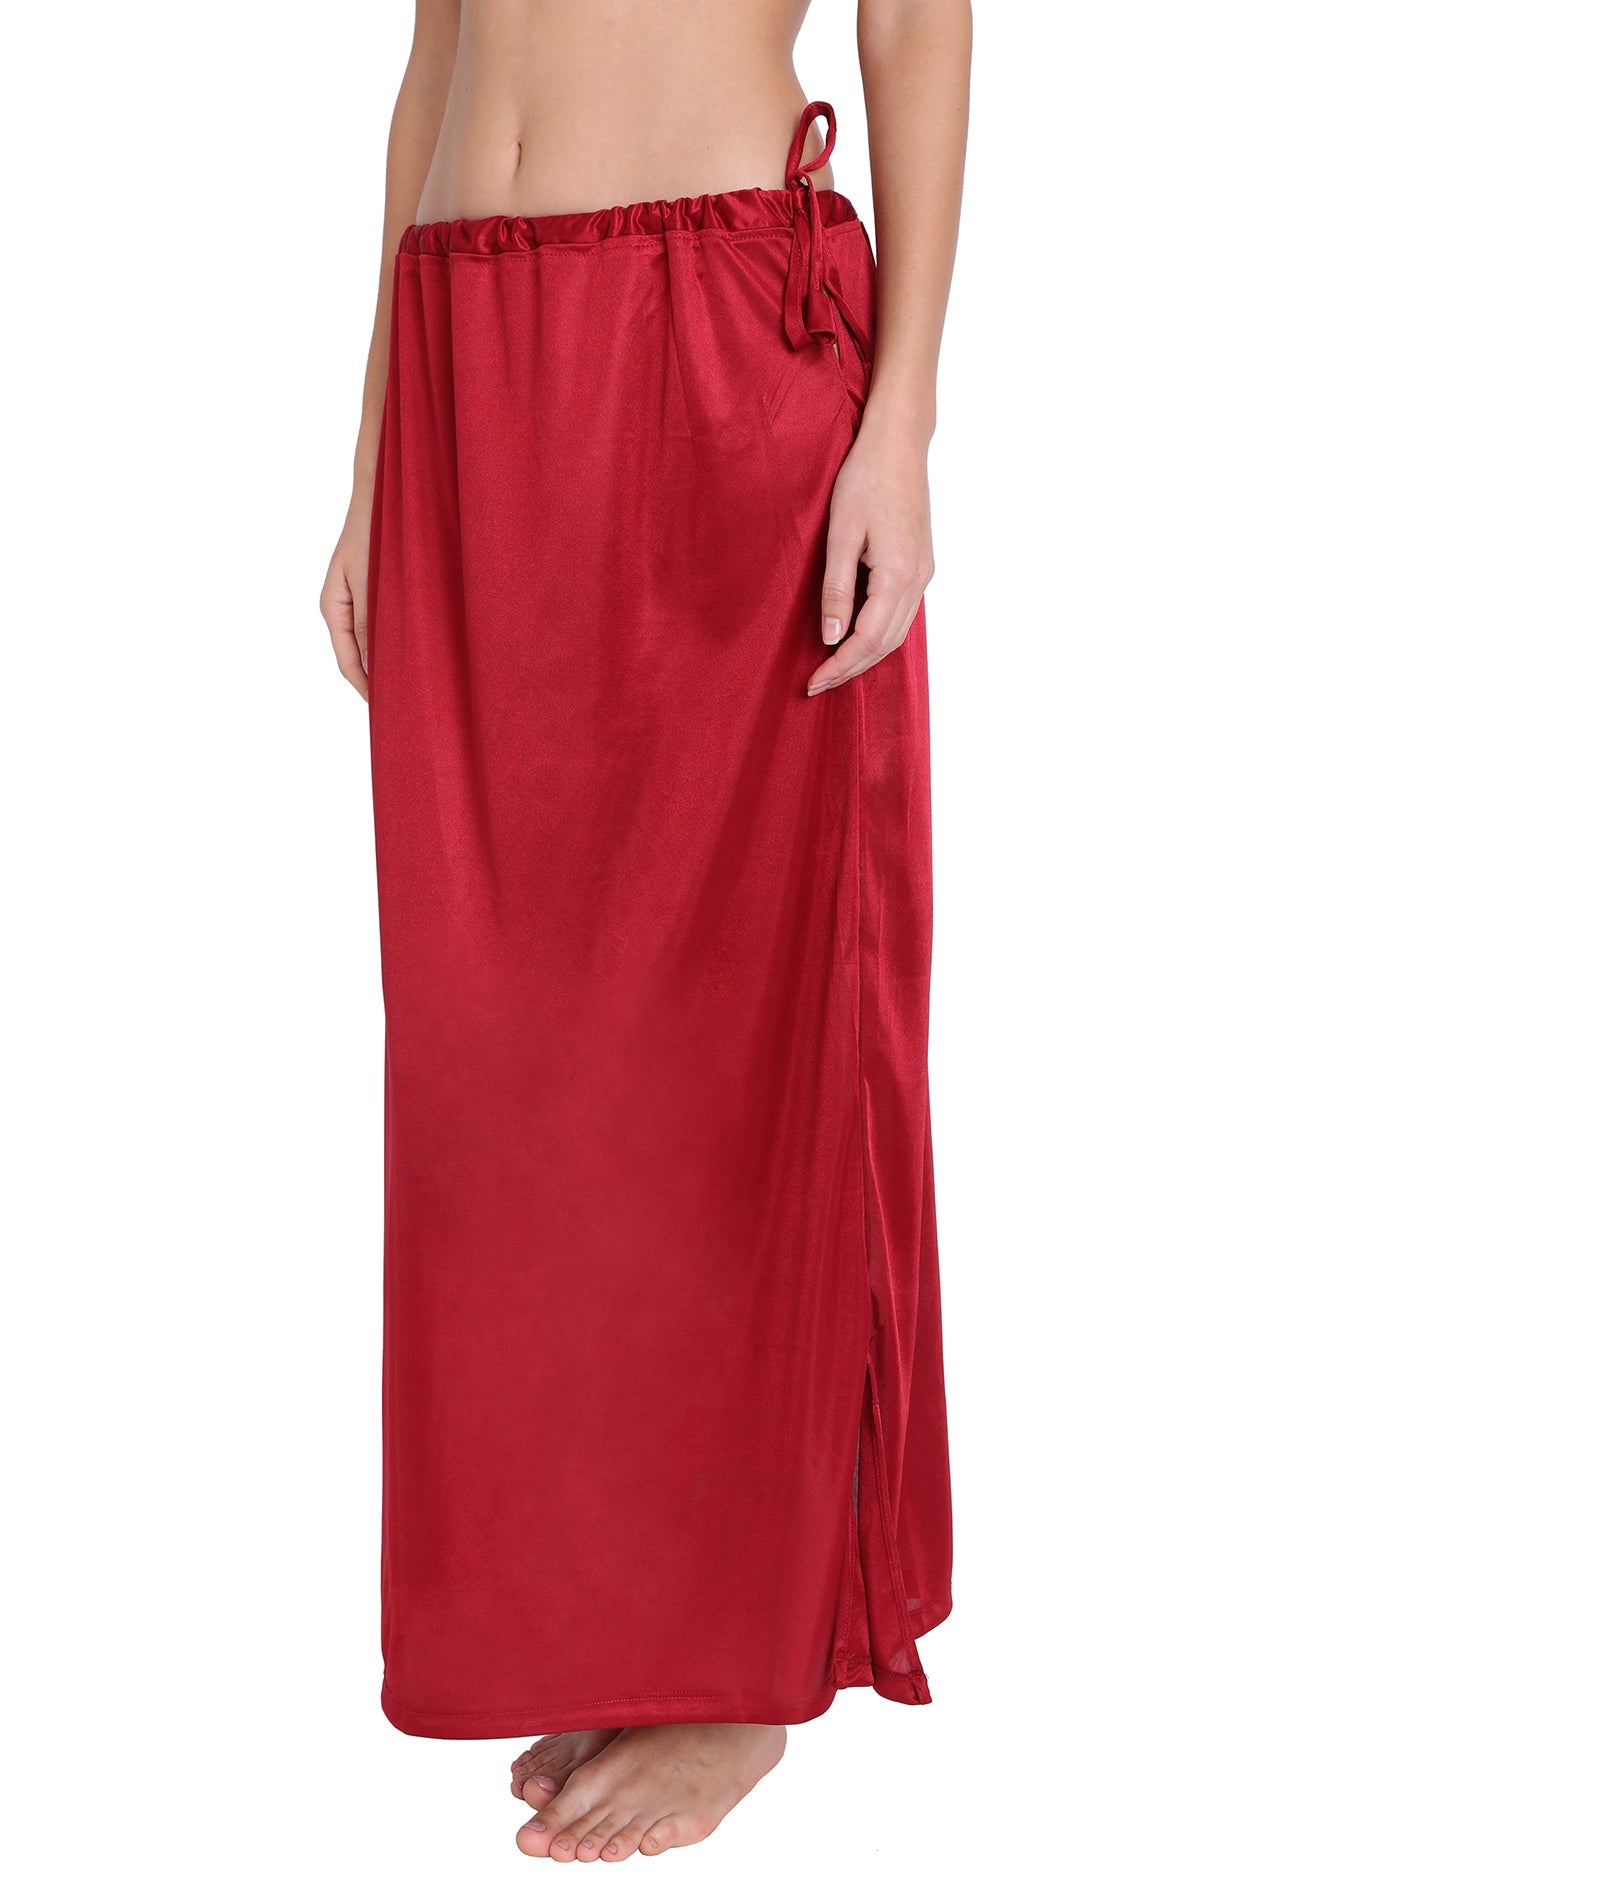 Red Rose Solid Satin Readymade Petticoat Stretchable Body Shaper Underskirt Indian Lining Shapers for Women's Sarees